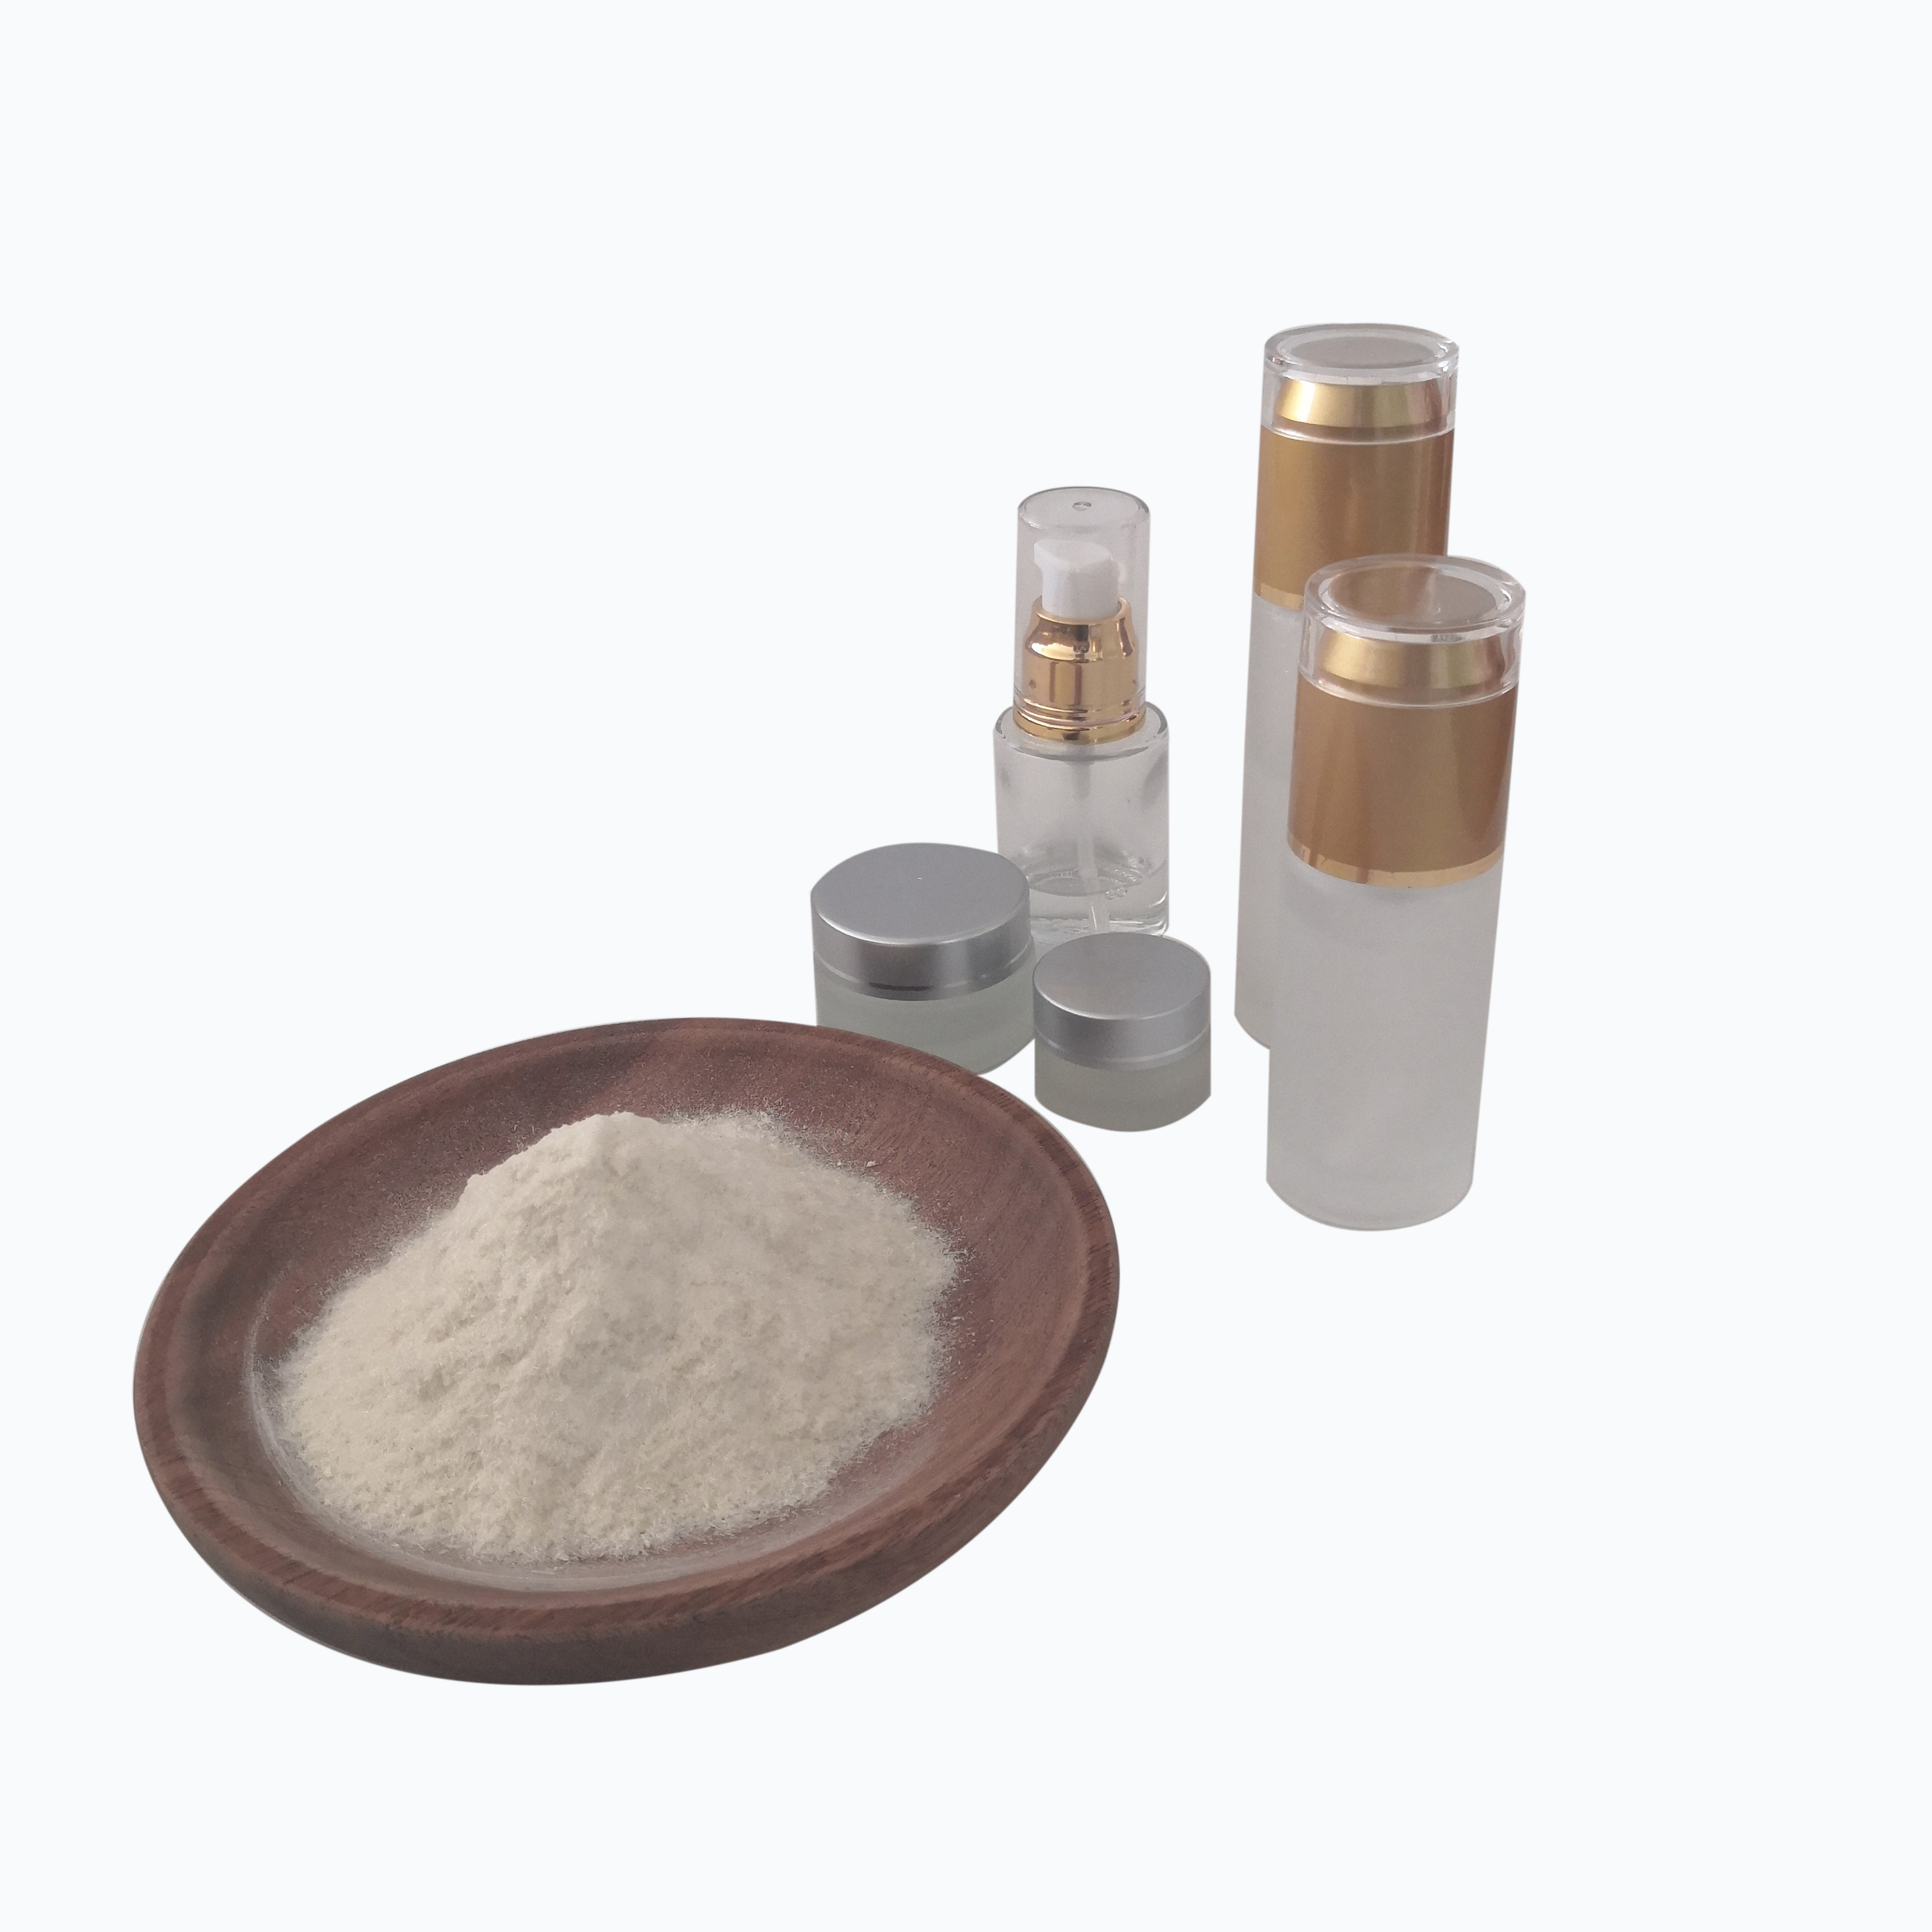 Application of Kojic Acid in Cosmeitc